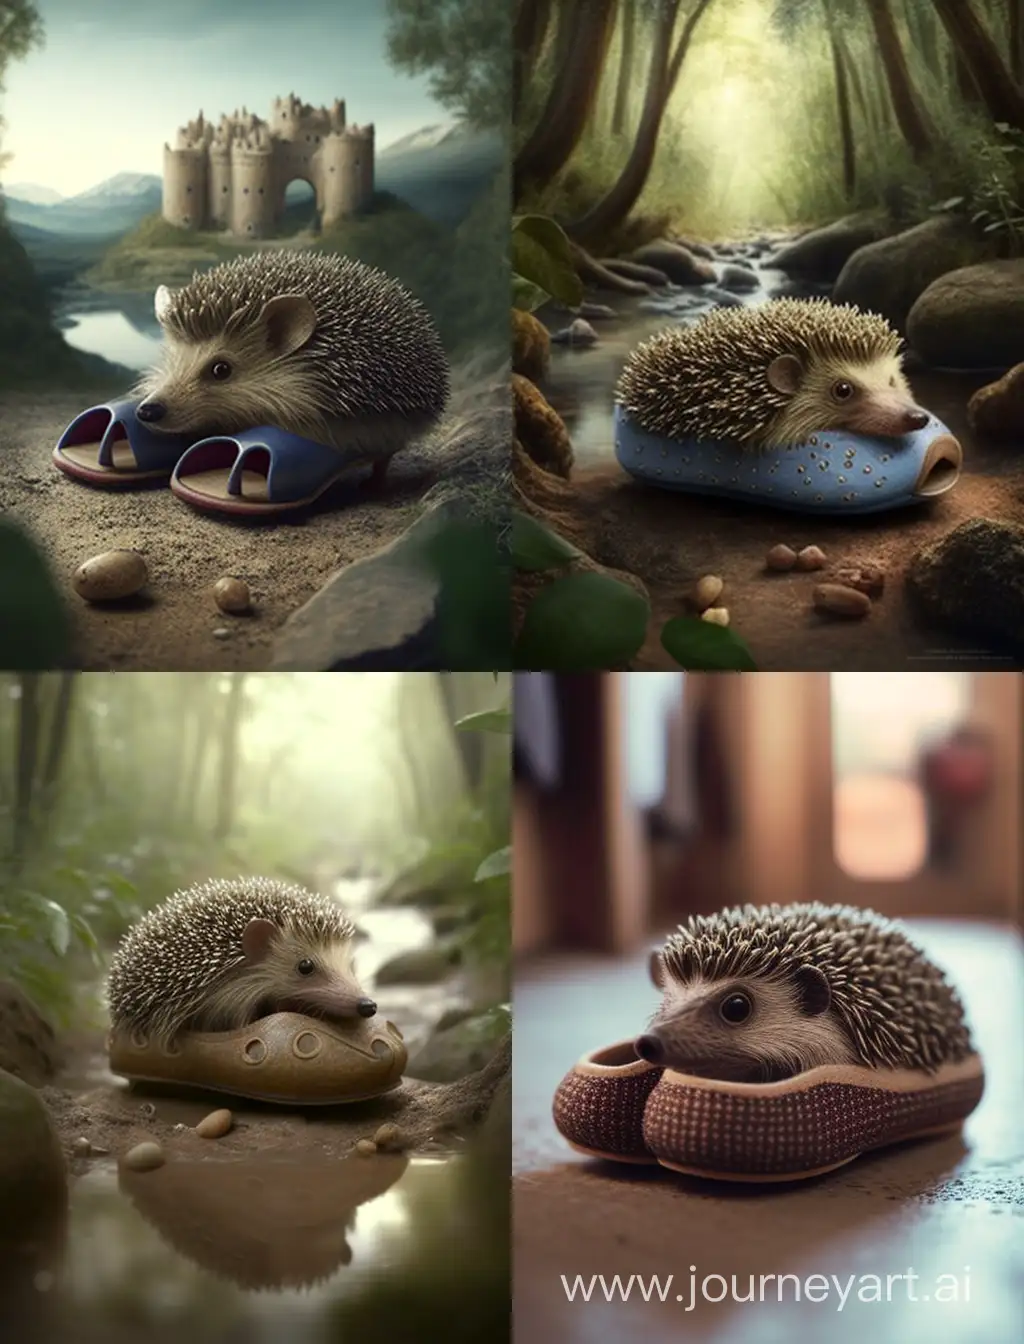 Hedgehogs-Wearing-Rubber-Slippers-Strolling-in-a-Whimsical-World